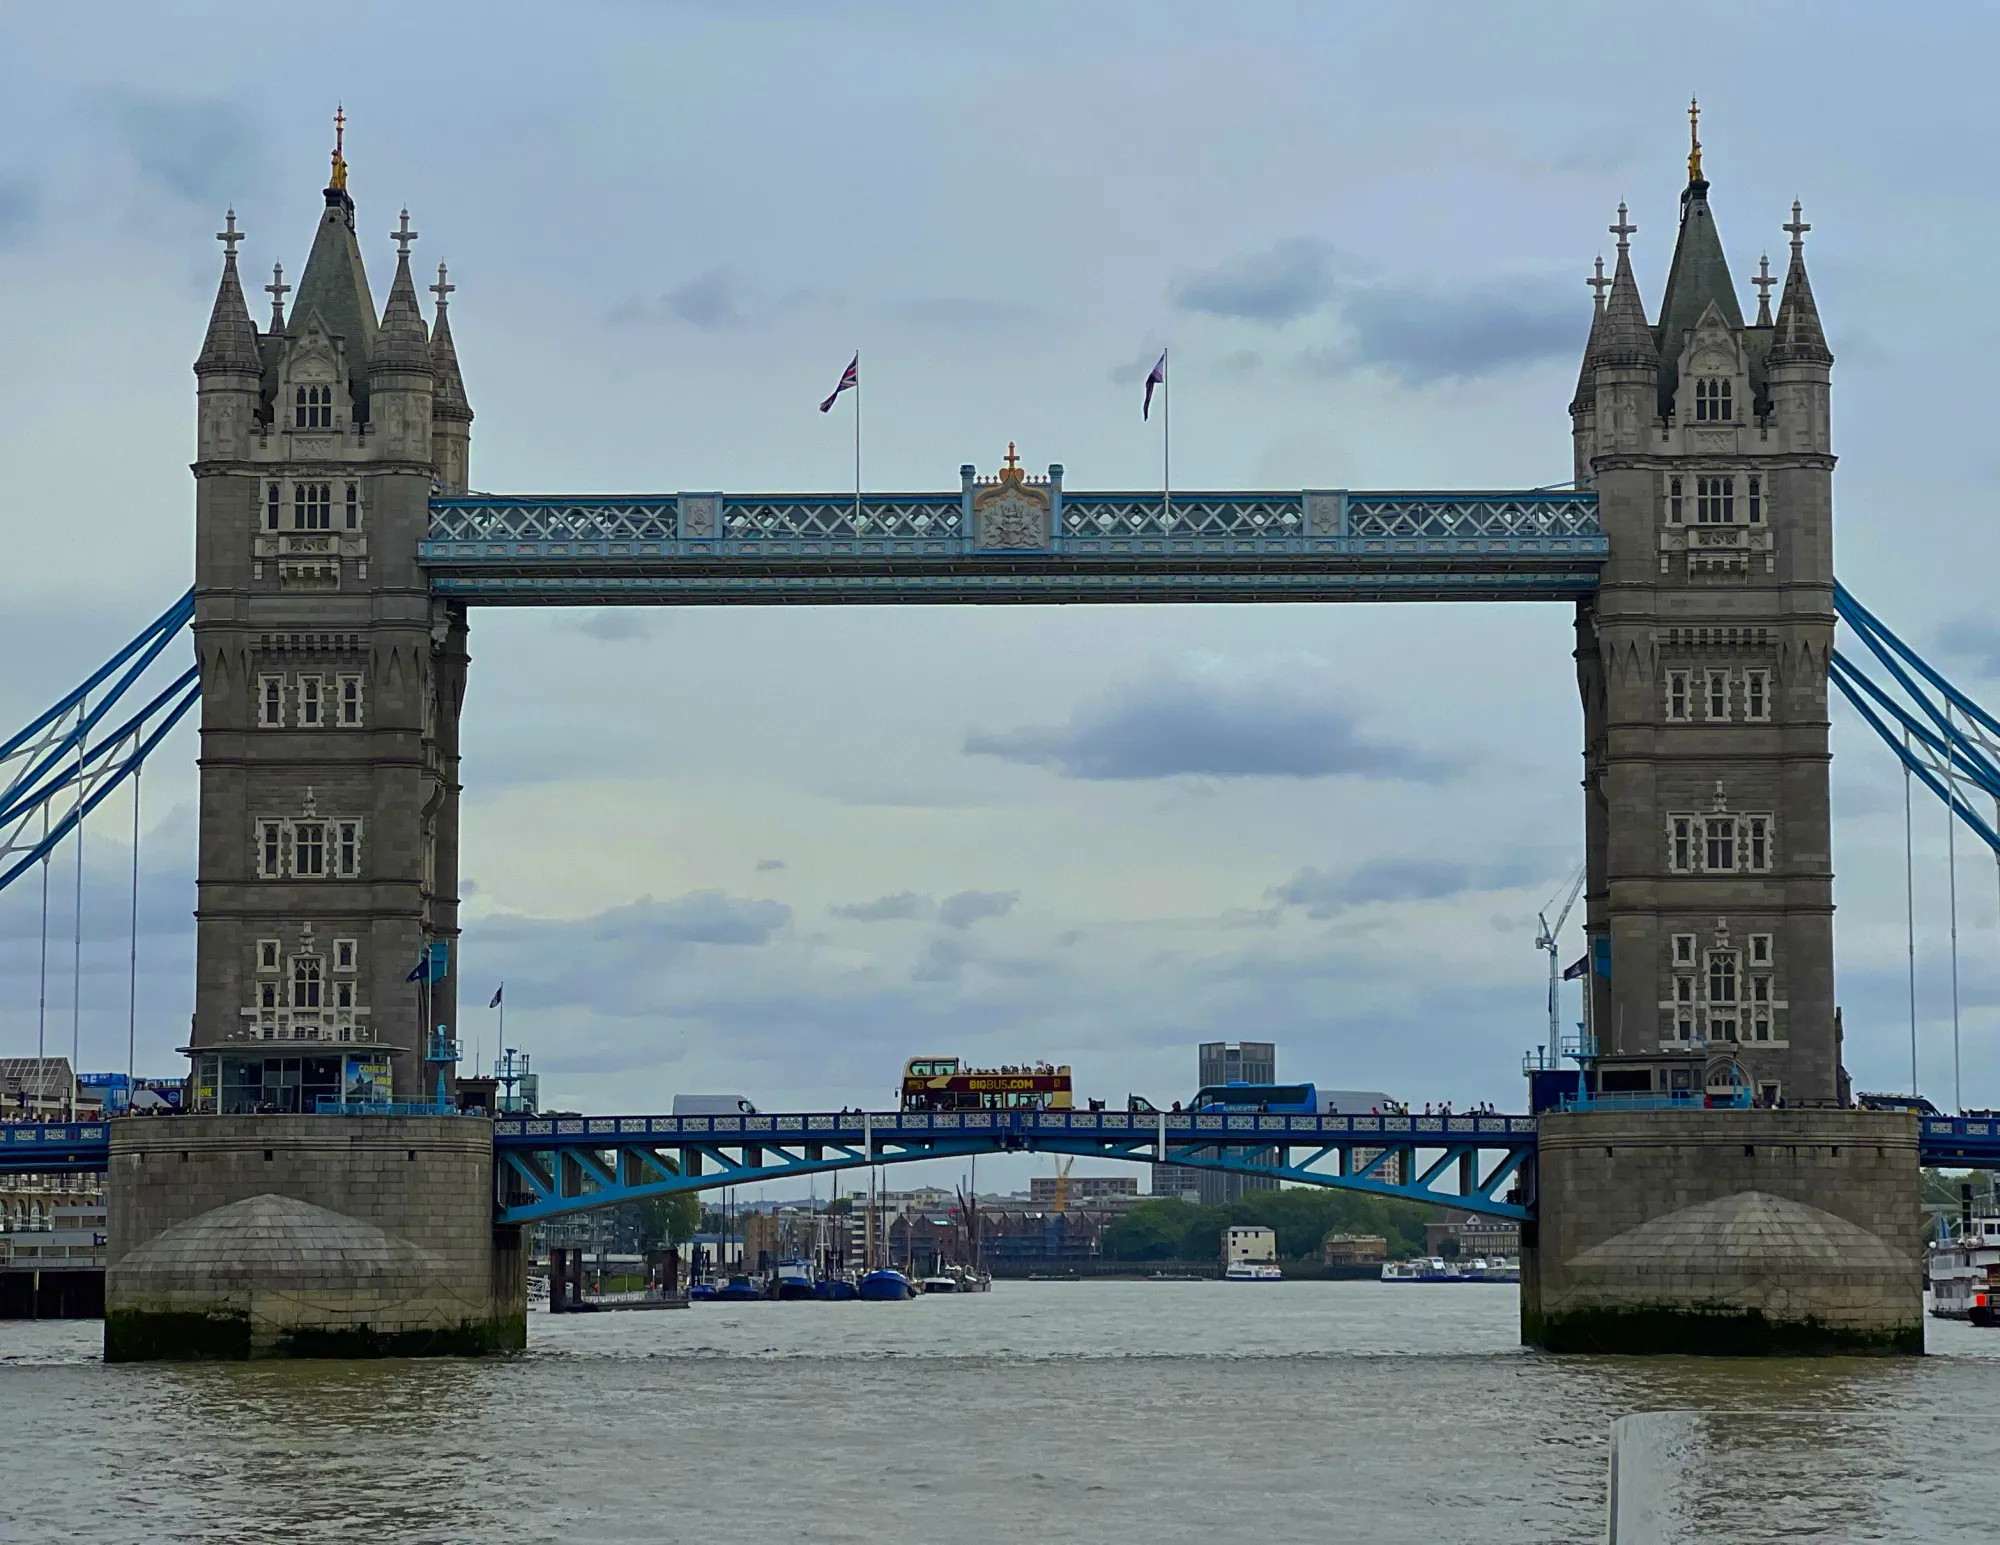 Bridge with two towers on either end and a double decker bus riding across it